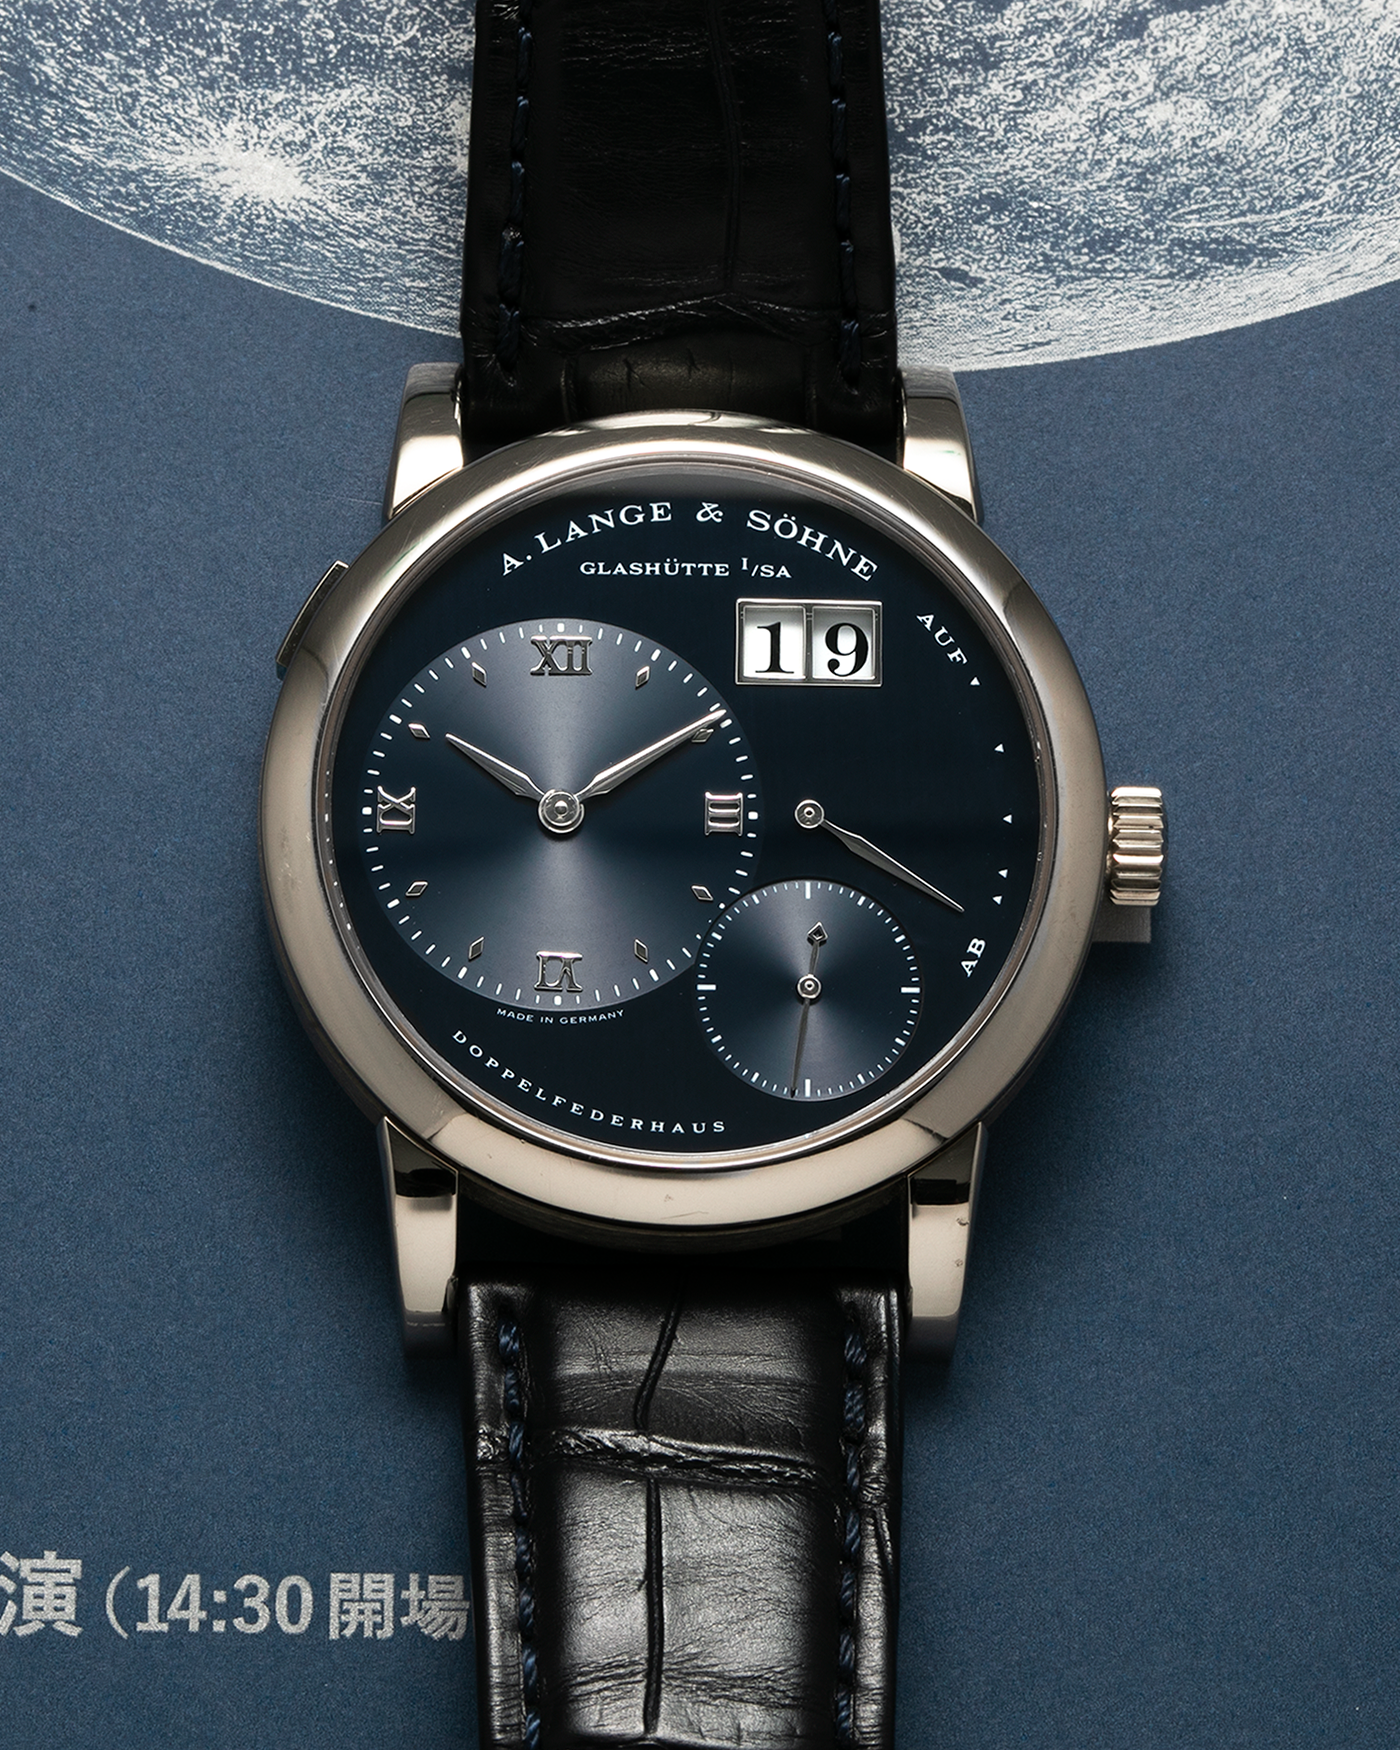 Brand: A. Lange & Söhne Year: 2000’s Model: Lange 1 Reference Number: 101.027 Material: 18-carat White Gold Movement: A. Lange & Söhne Cal. L901.5, Manual Winding Case Diameter: 38.5mm Strap: A. Lange & Söhne Black Alligator Leather Strap with Signed 18-carat White Gold Tang Buckle